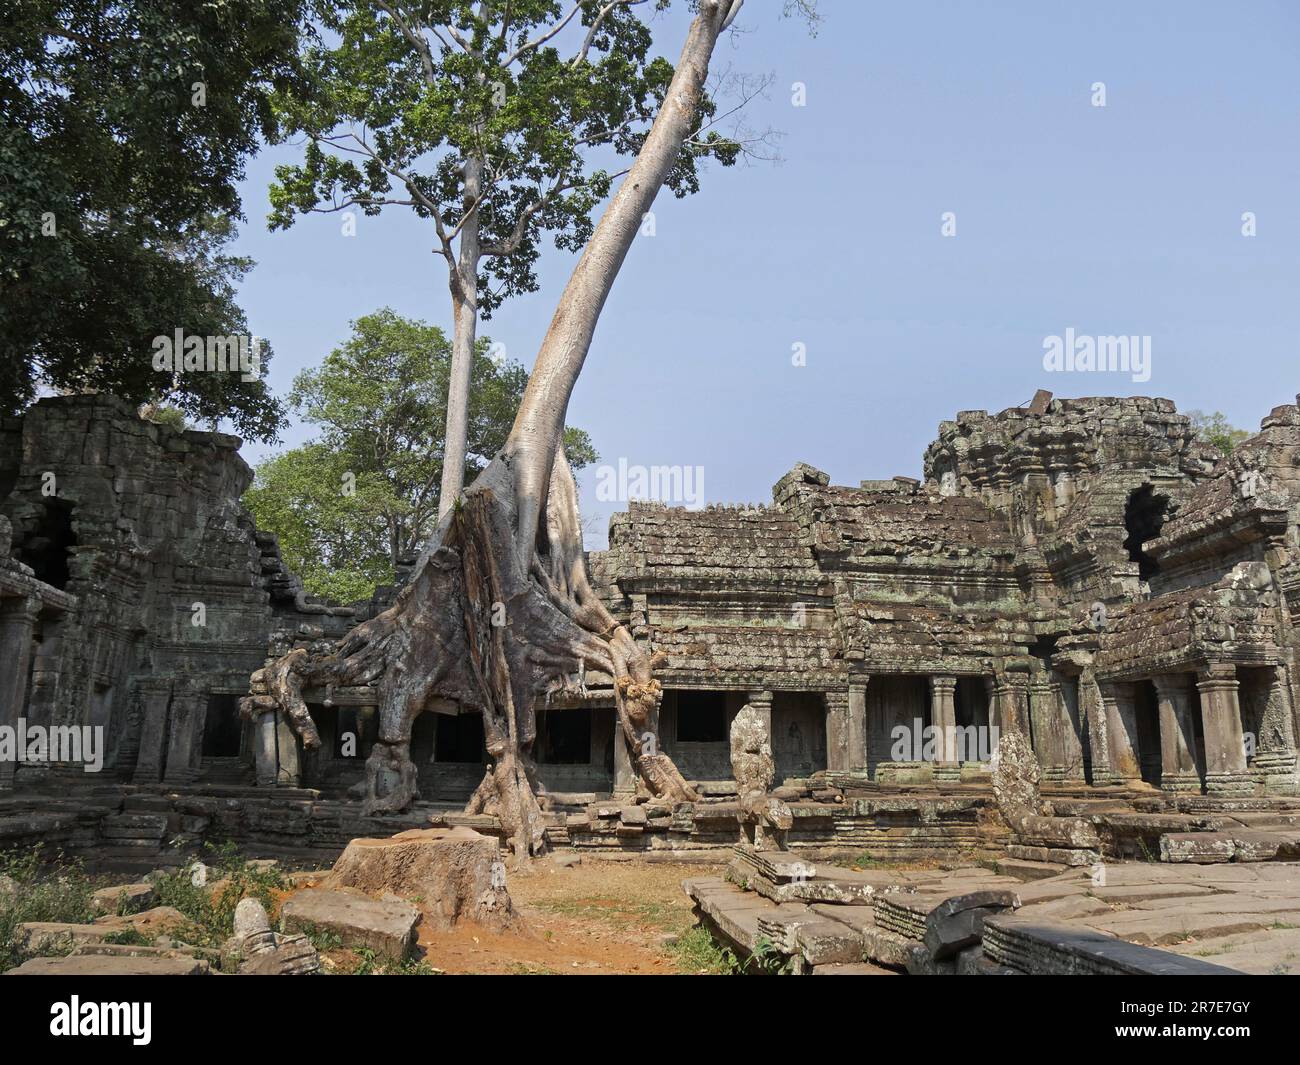 Preah Khan Temple, Siem Reap Province, Angkor's Temple Complex Site listed as World Heritage by Unesco in 1192, built in 1191 by King Jayavarman VII, Stock Photo